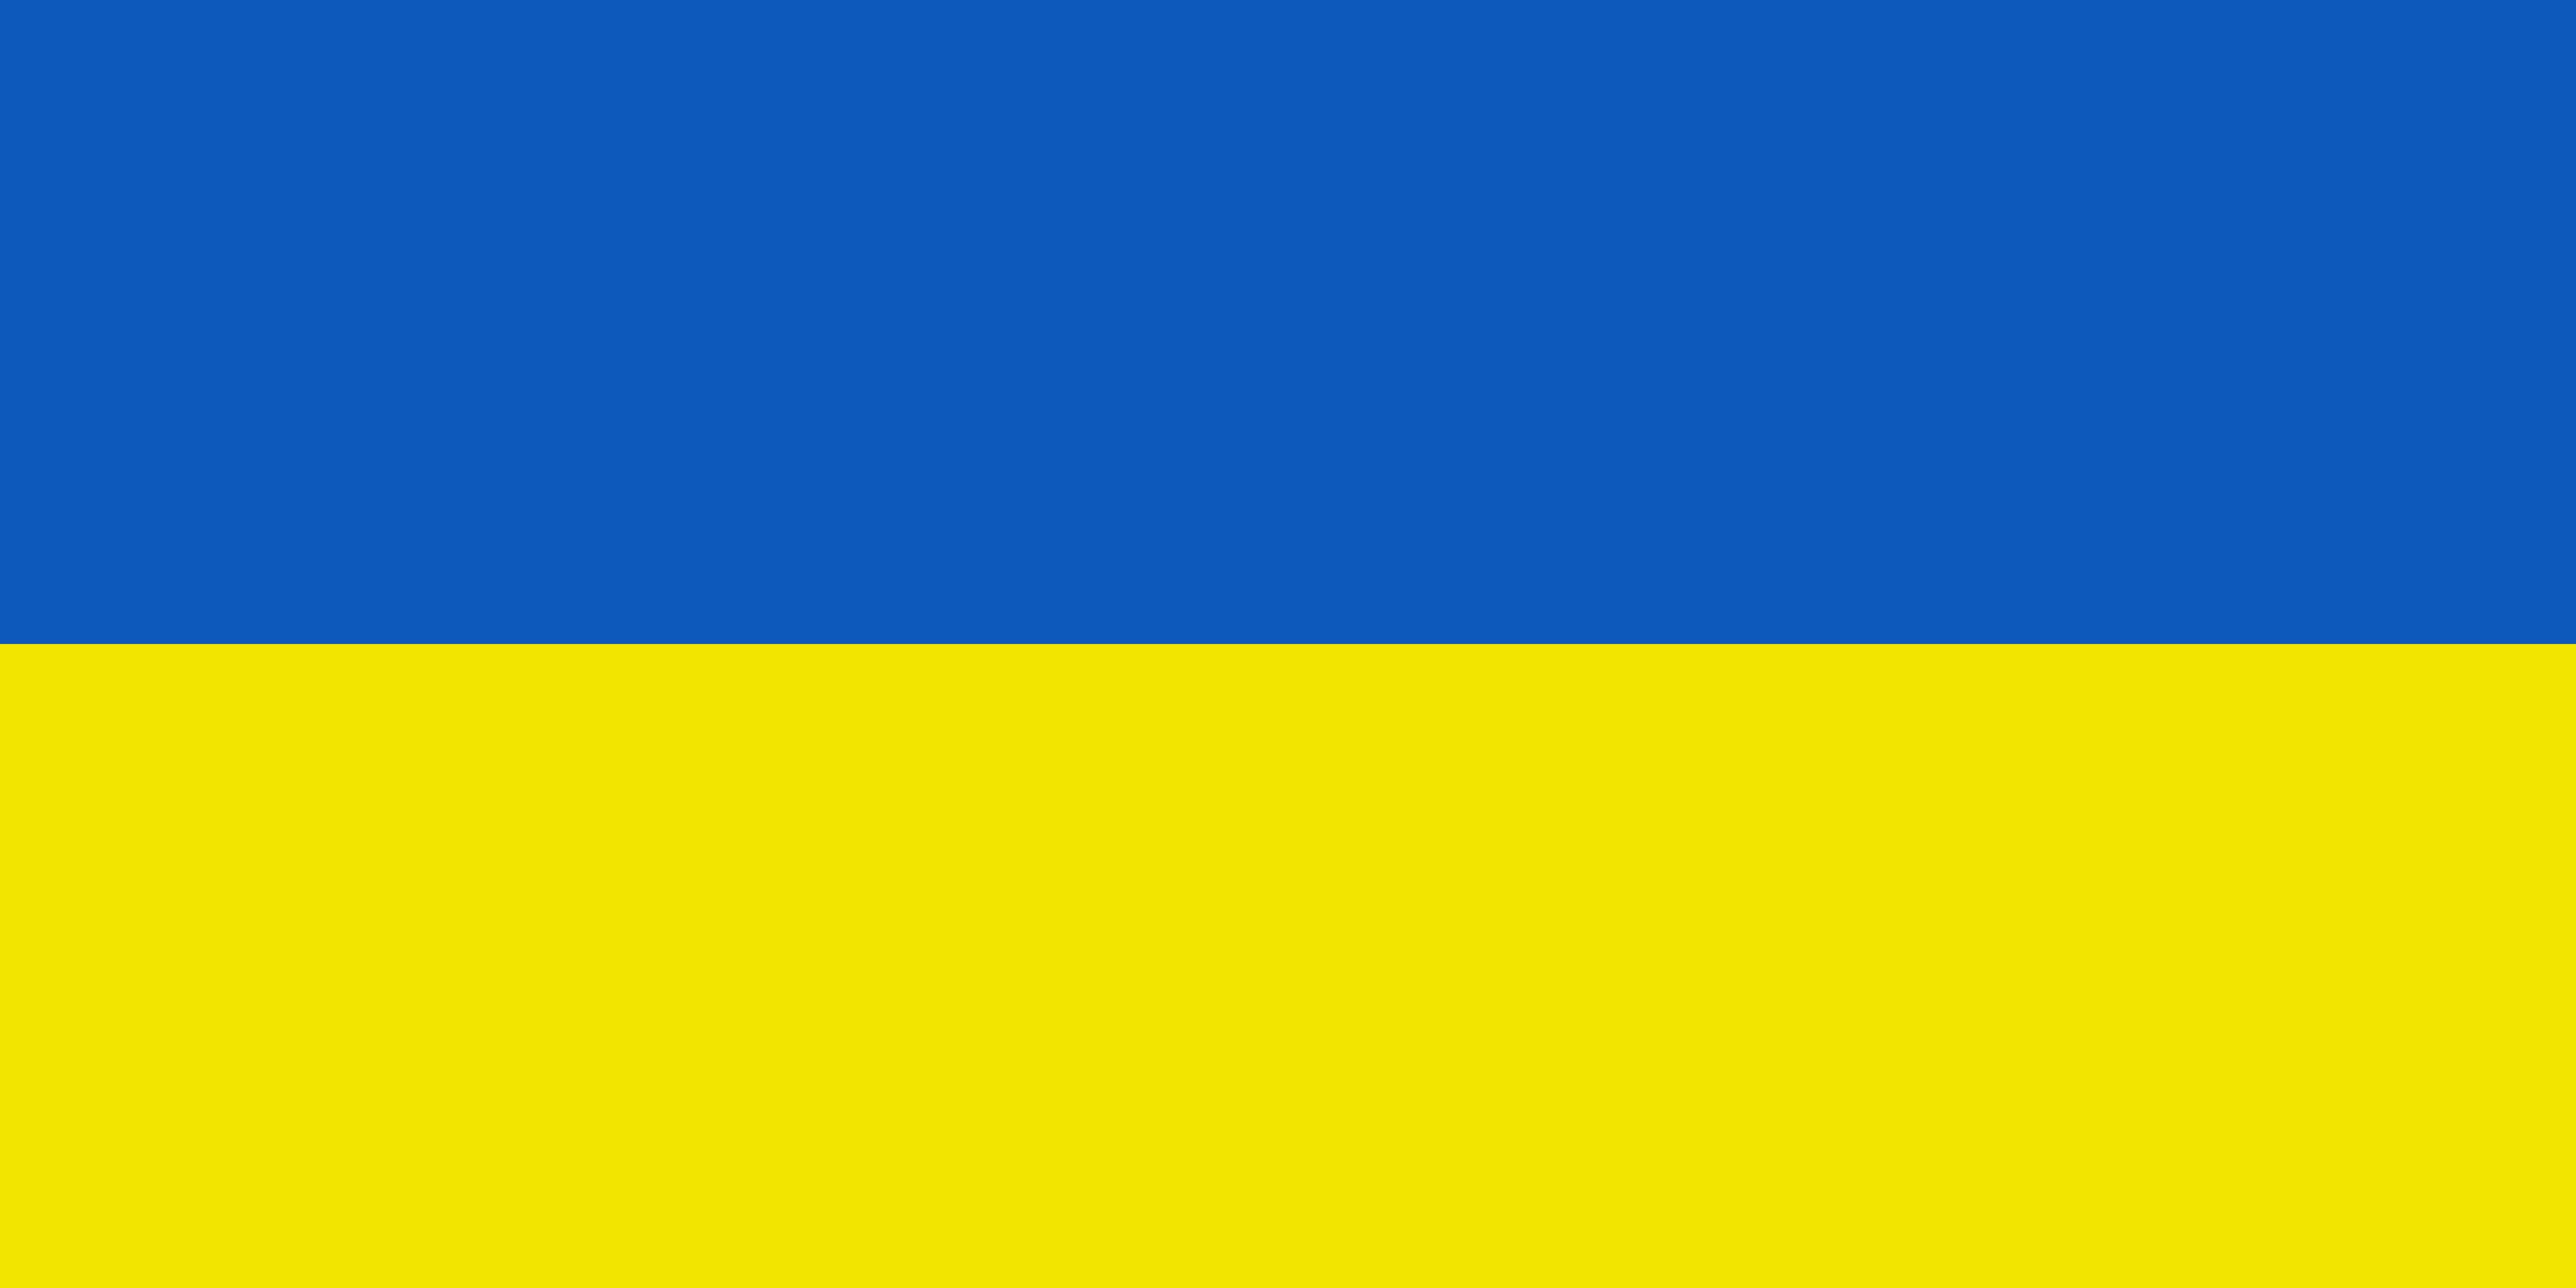 A blue and yellow representation of the Ukrainian flag